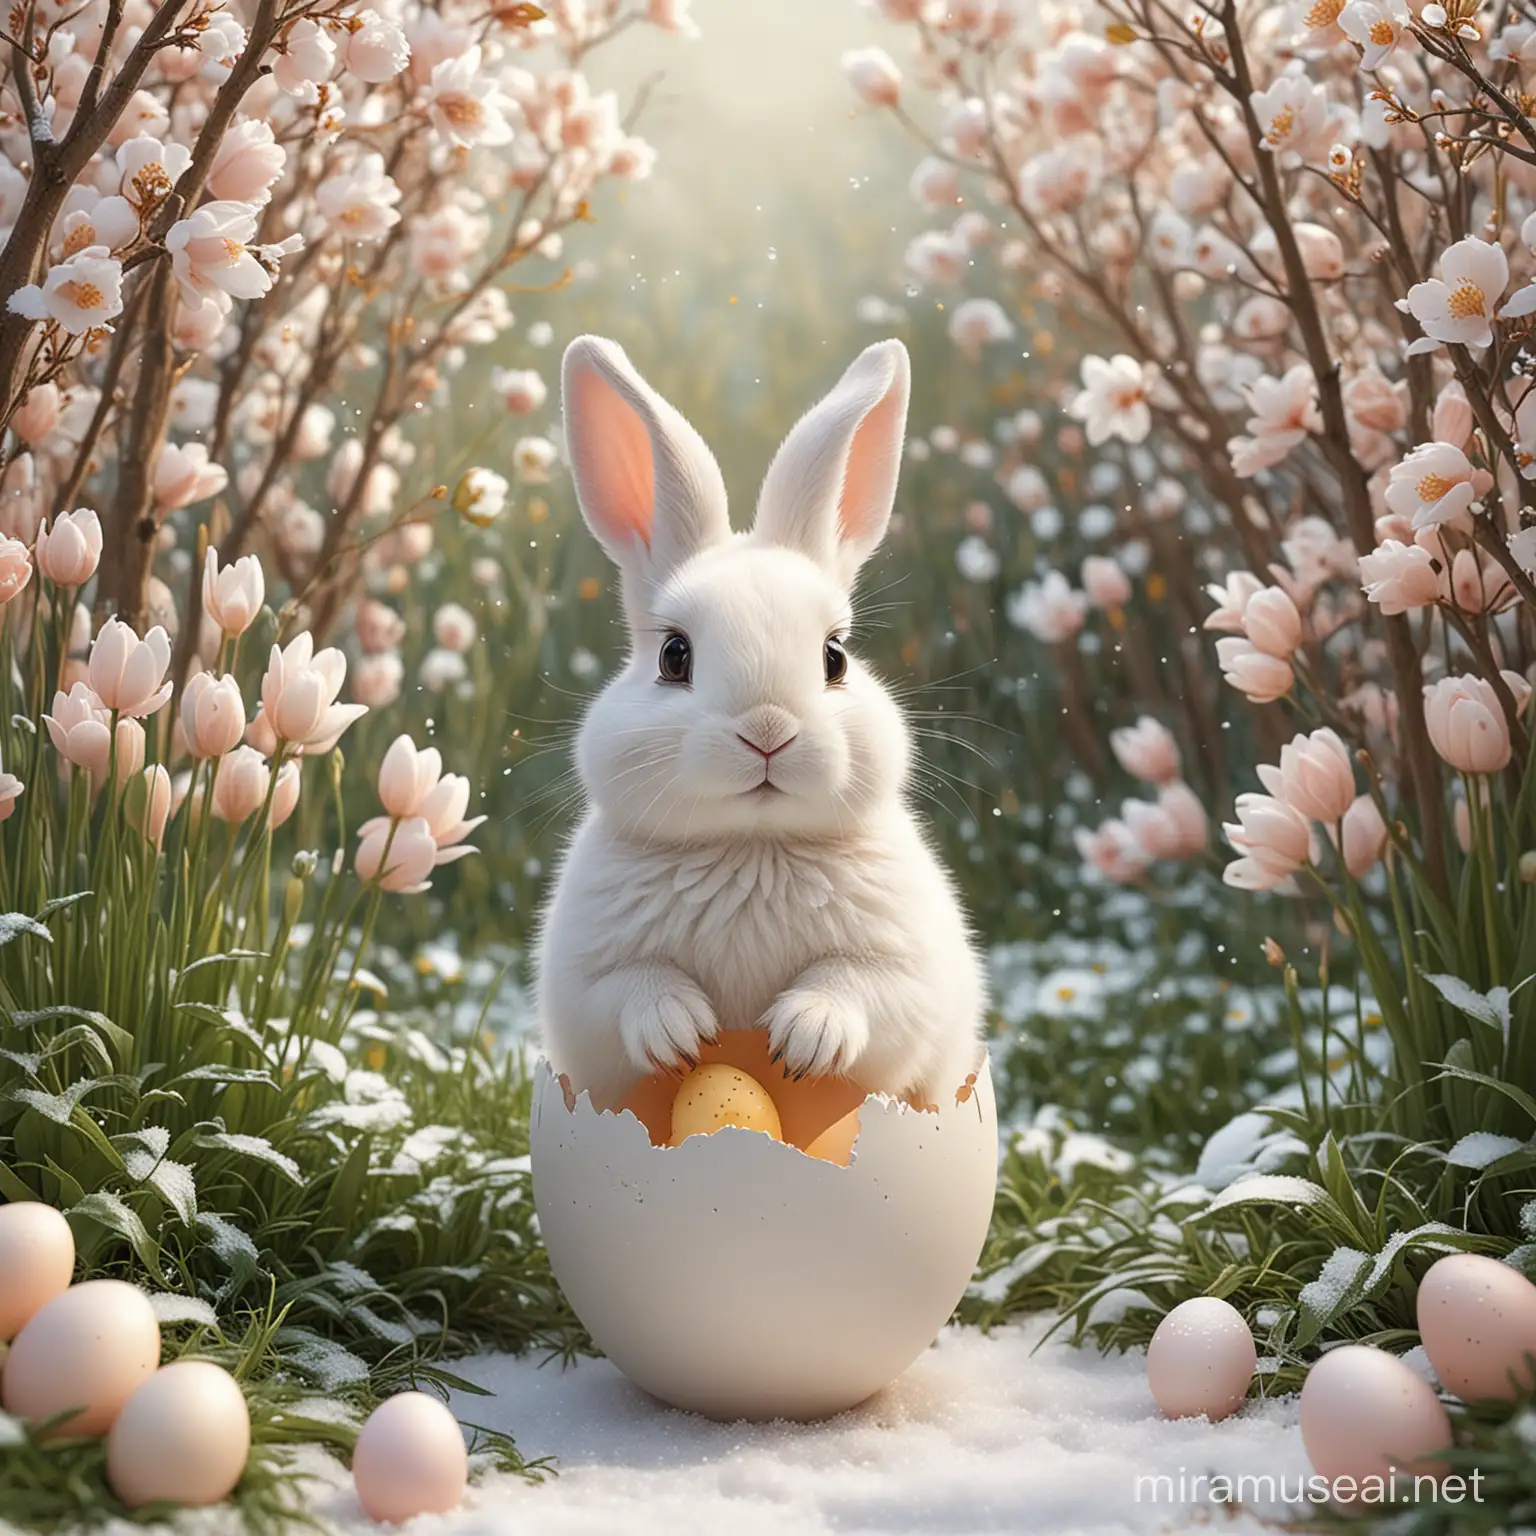 Enchanting Bunny Emerges from Pastel Egg AI Illustration of Innocence and Wonder